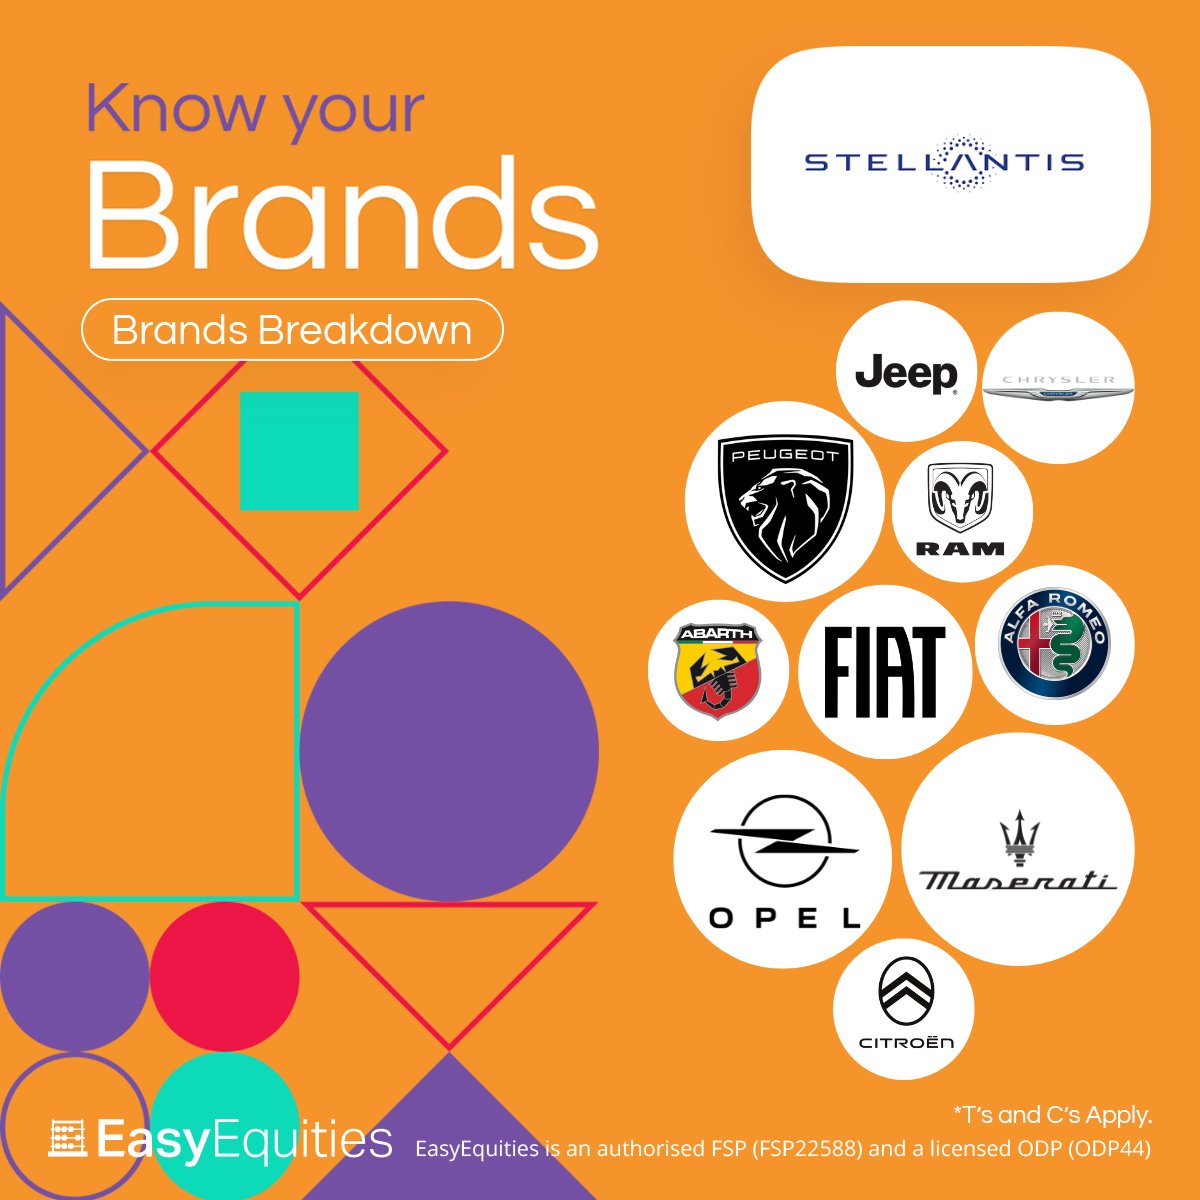 Whether it’s an Alfa Romeo, Citroën, Dodge, Fiat, or Jeep® - if you can't afford to drive the brand, letting your money ride the brand is an option by investing in the company behind the brands. blogs.easyequities.co.za/know-your-bran… #EasyBlogs | #EasyEquities